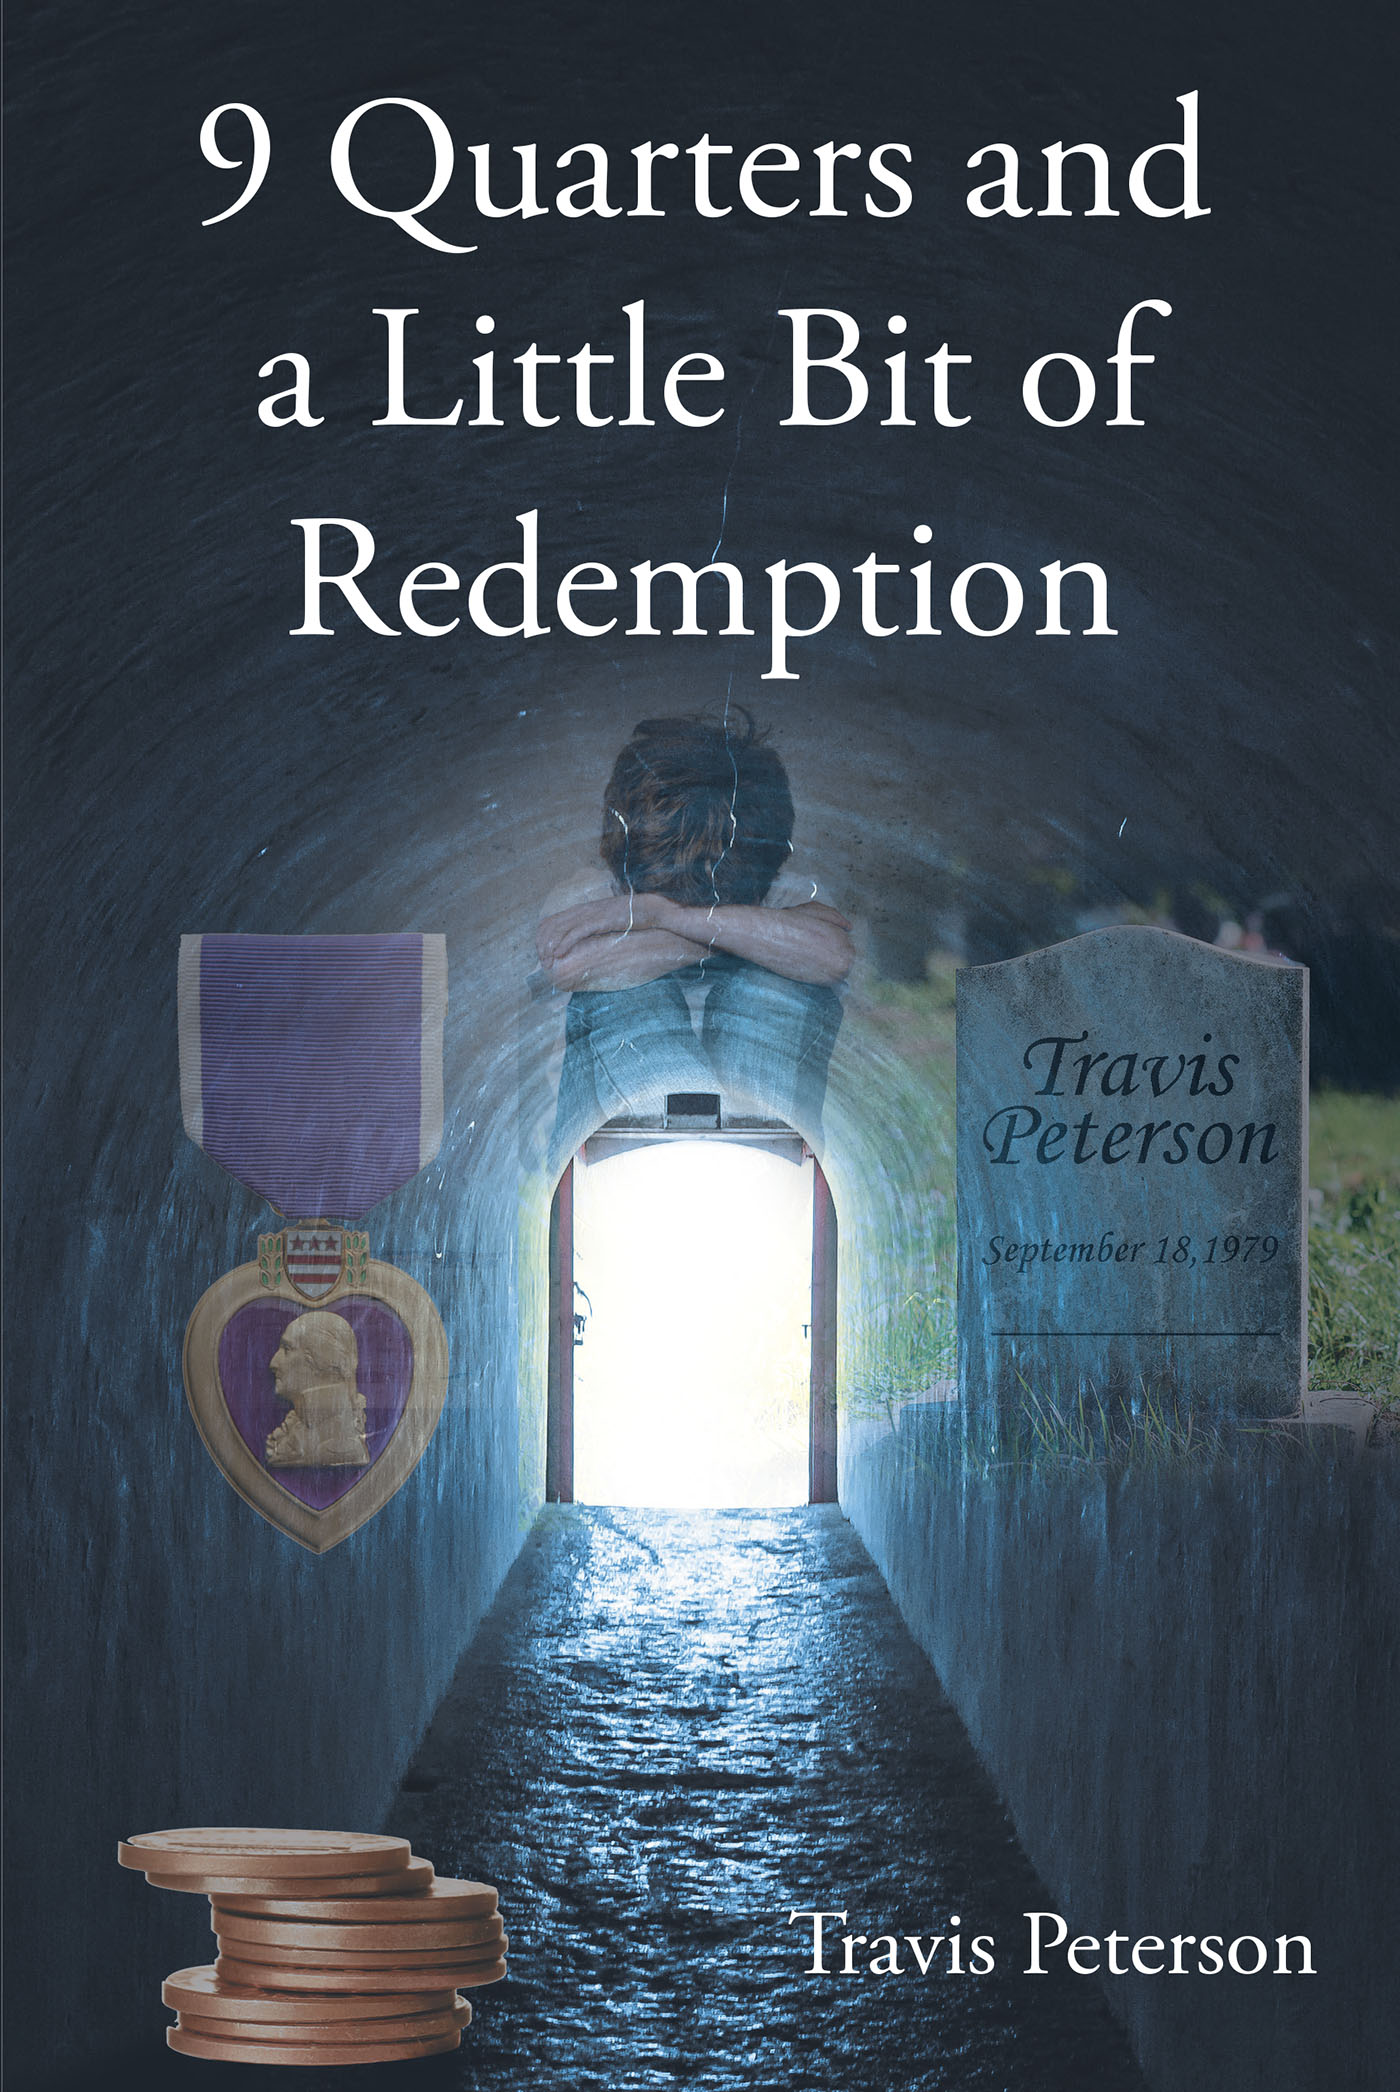 Author Travis Peterson’s New Book, "9 Quarters and a Little Bit of Redemption," is an Intimate Self-Portrait Revealing All That the Author Overcame Throughout His Life